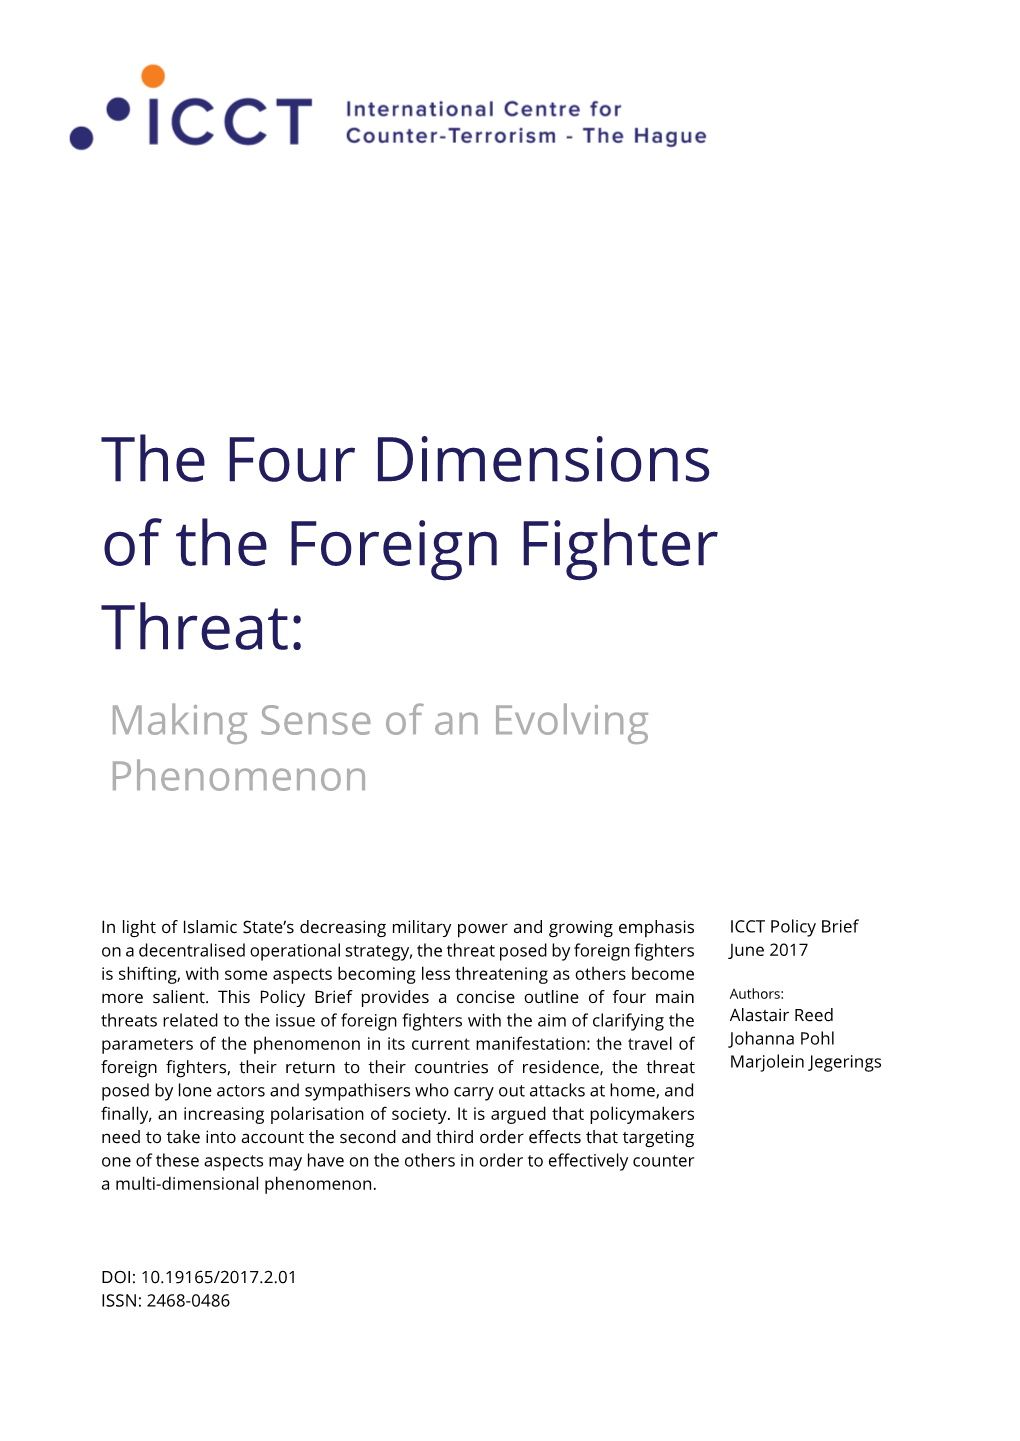 The Four Dimensions of the Foreign Fighter Threat